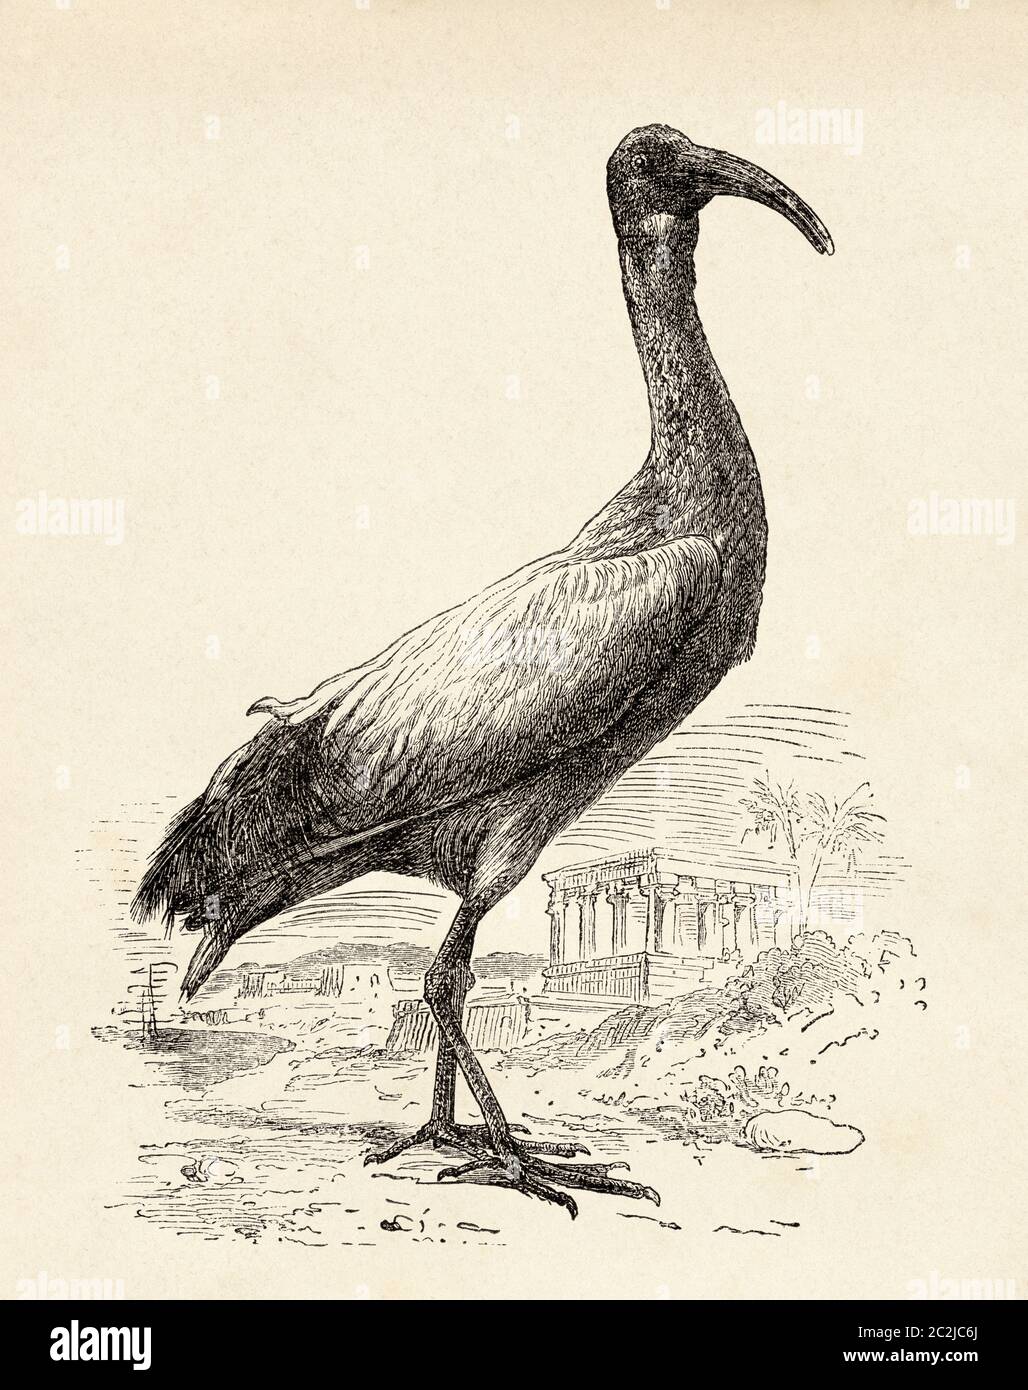 Ibis. The Tresquiornitinos (Threskiornithinae) Subfamily of pelecaniformes birds of the family Threskiornithidae, known as ibis, a word from the Greek, which in turn comes from the ancient Egyptian hib. Old 19th century engraved illustration, El Mundo Ilustrado 1880 Stock Photo